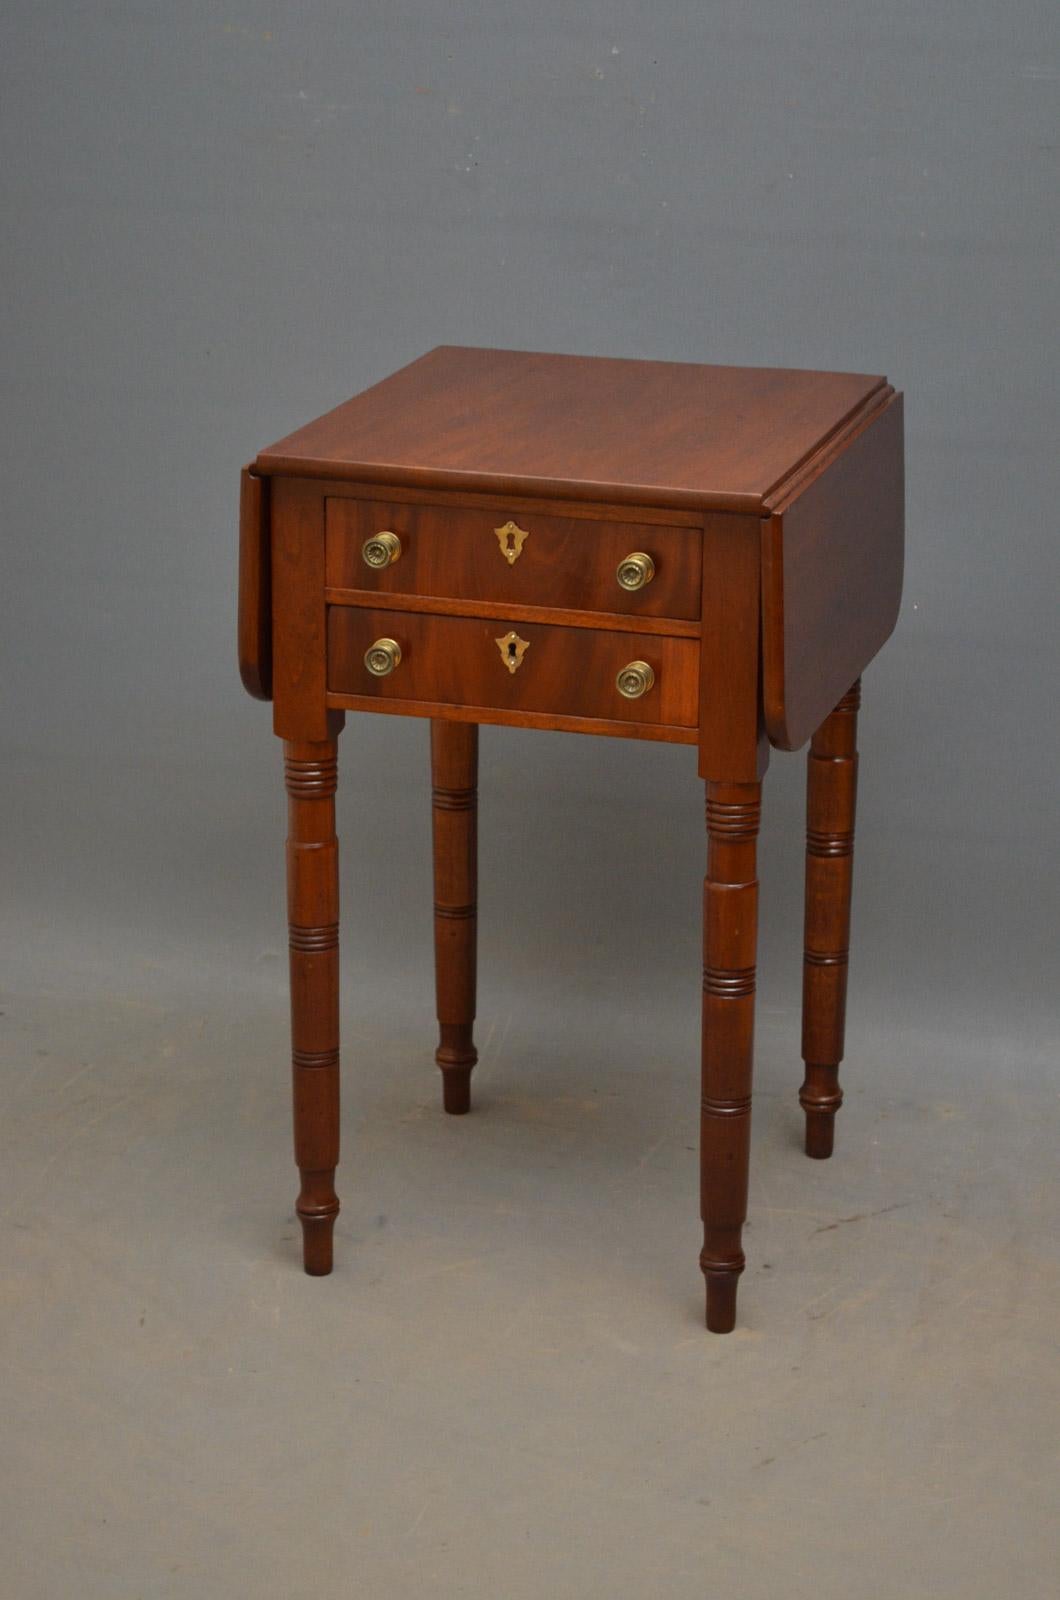 Sn505, very elegant Regency, work table in mahogany, having drop leaves, three drawers with figured mahogany fronts, brass knobs and escutcheons, all standing on slim, turned and ringed legs. This attractive side table would make fantastic lamp